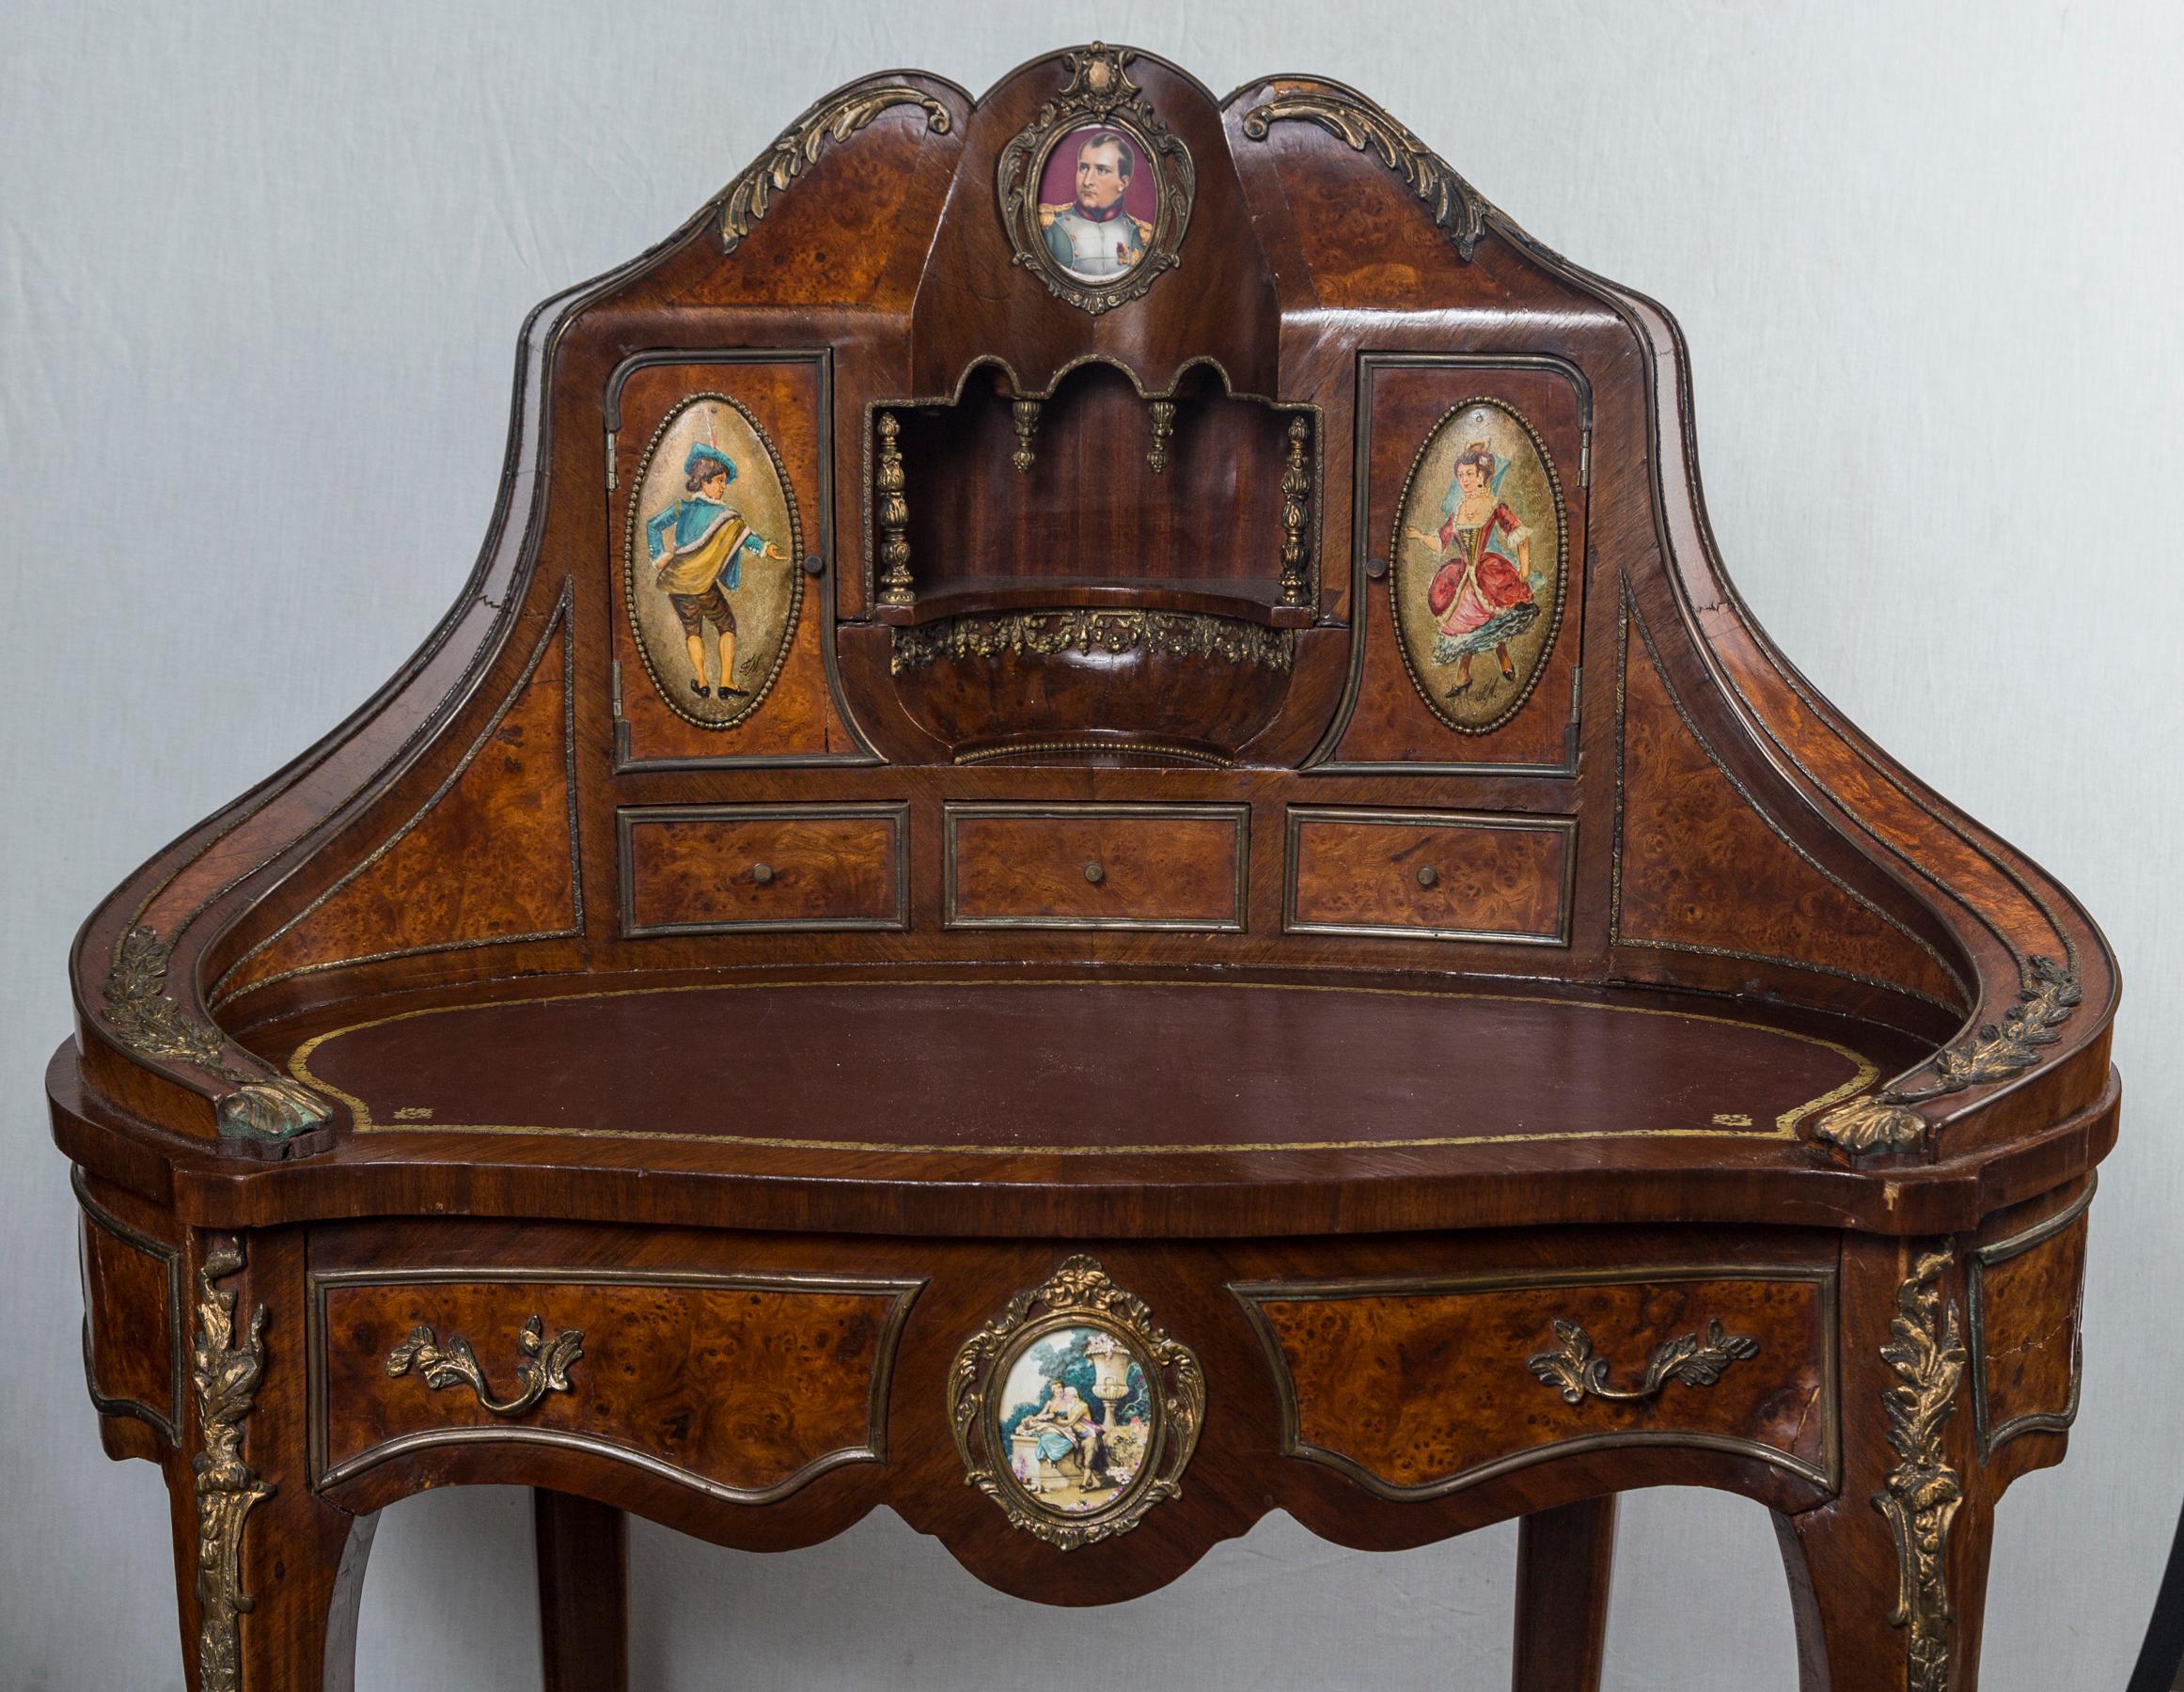 In the Louis XV style, a curved lady's desk with brown leather and gold tool work.
One long drawer below the writing surface. Three short drawers at the writing surface. The writing surface area measures 14 x 29. It is 32 inches off the floor with